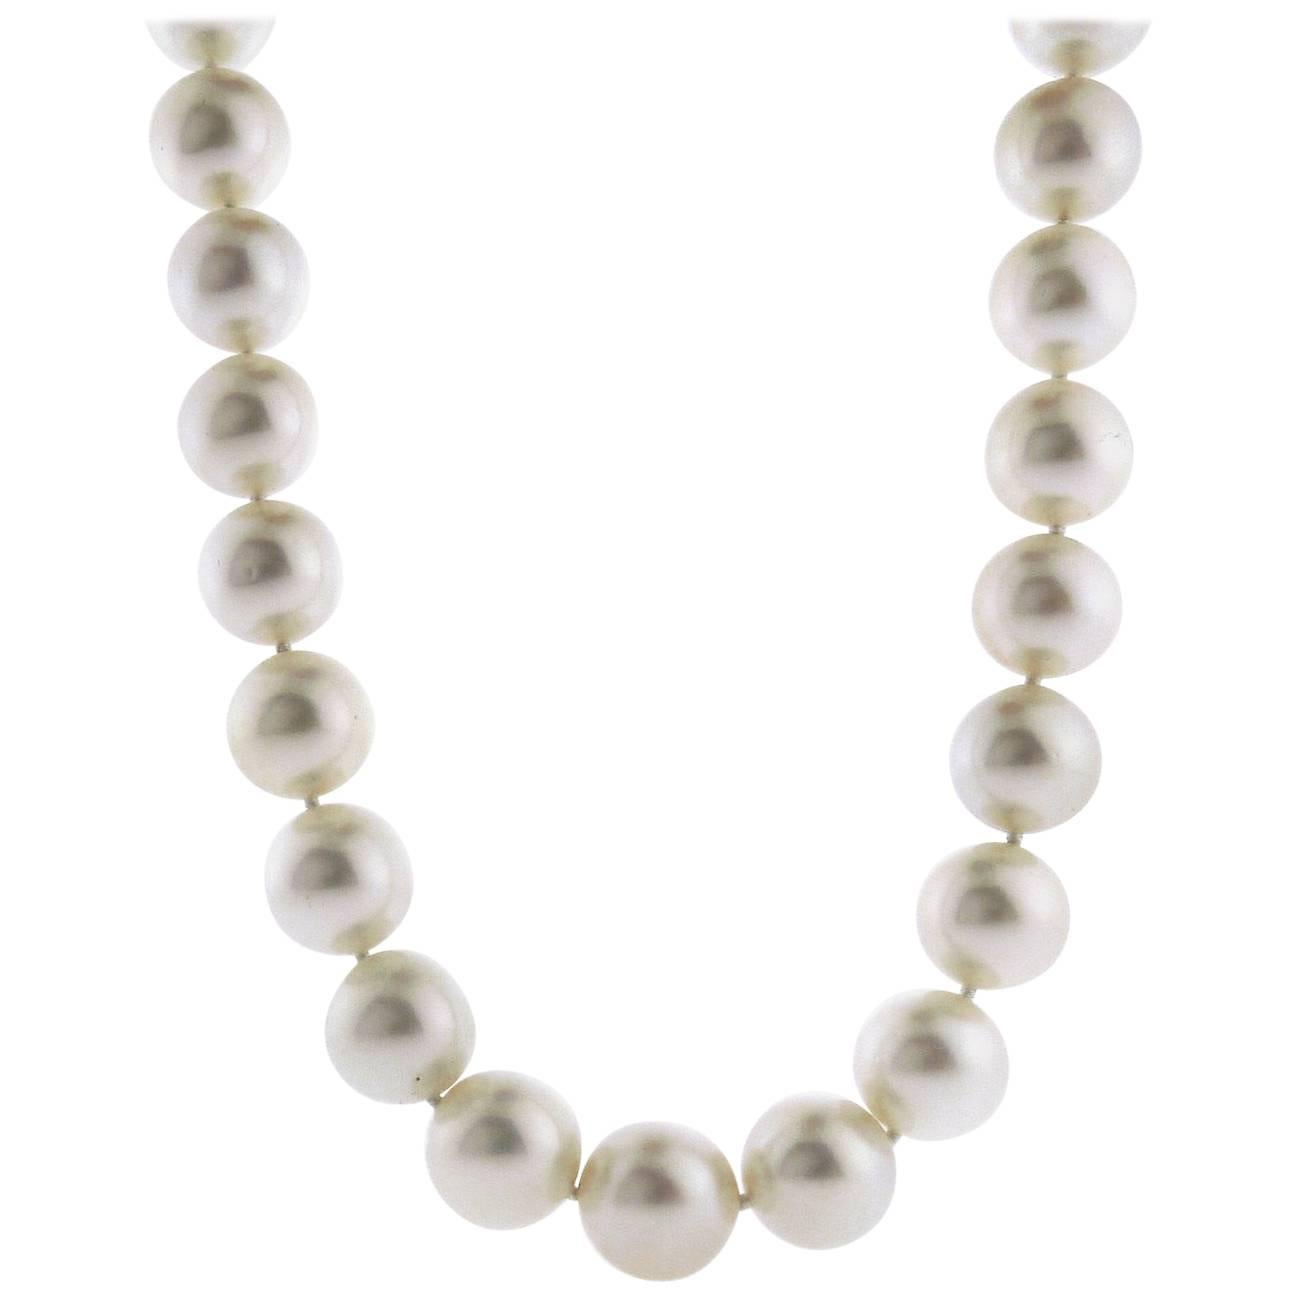 Rare Opera Length White South Sea Pearls of Nearly Uniform Size For Sale